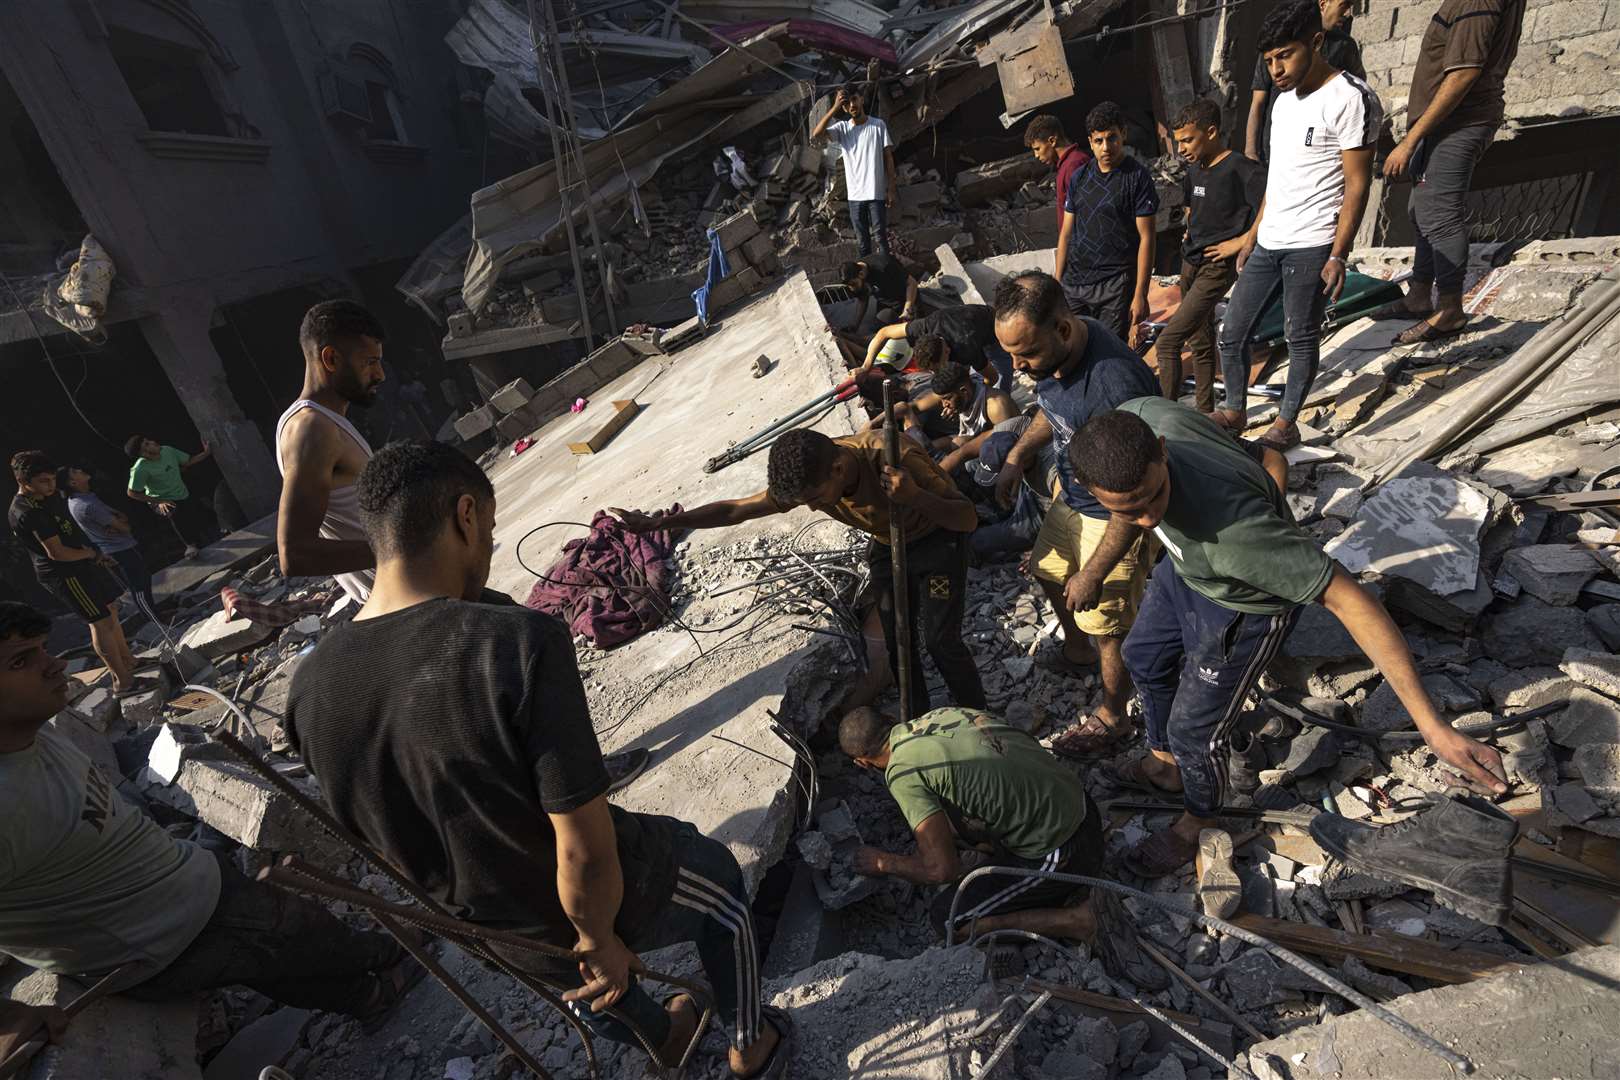 Palestinians search for bodies and survivors in the rubble of a residential building levelled in an Israeli airstrike (Fatima Shbair/AP)